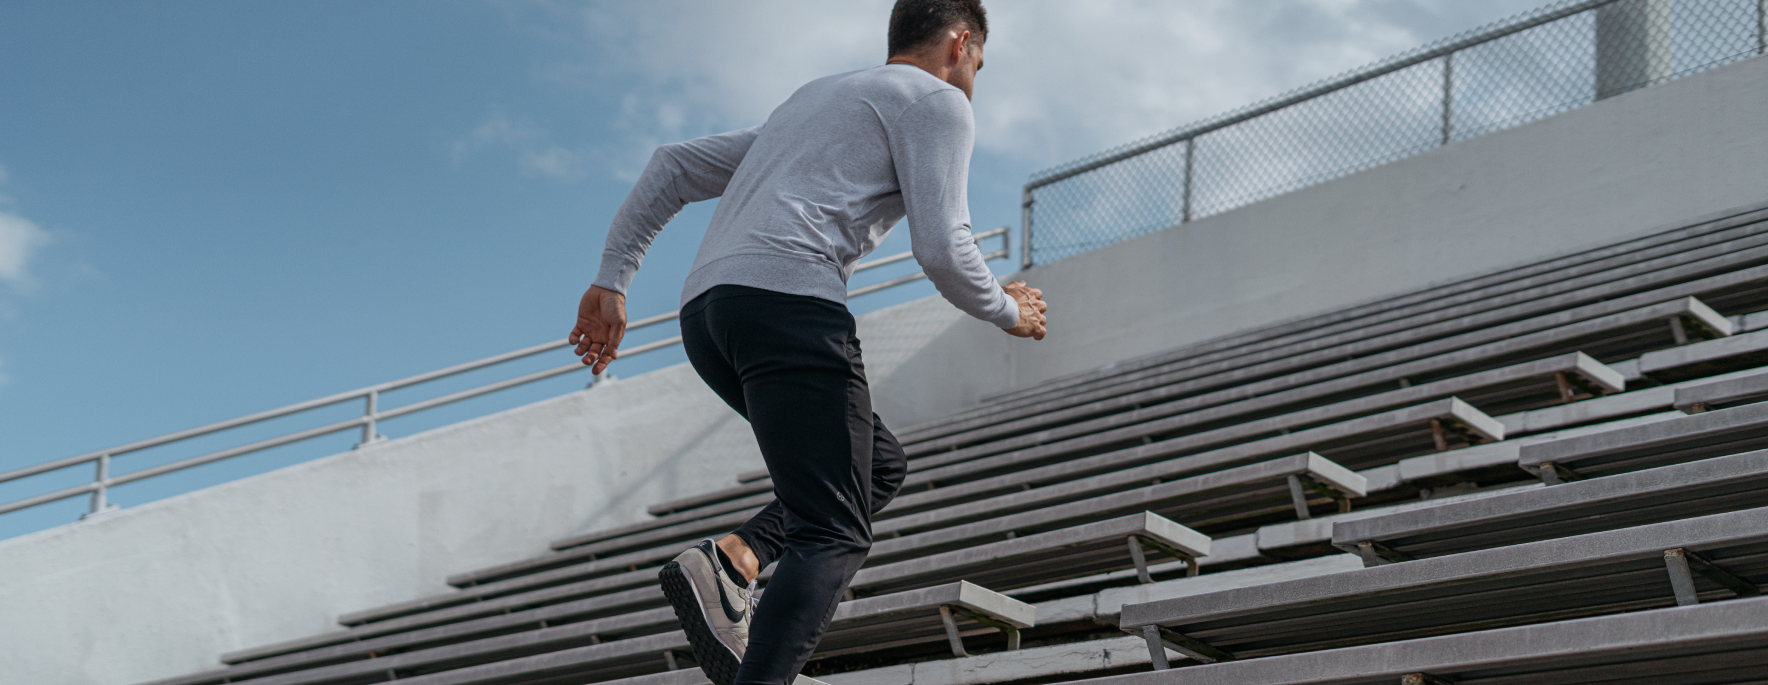 The benefits to wearing slim fit joggers - Cerus